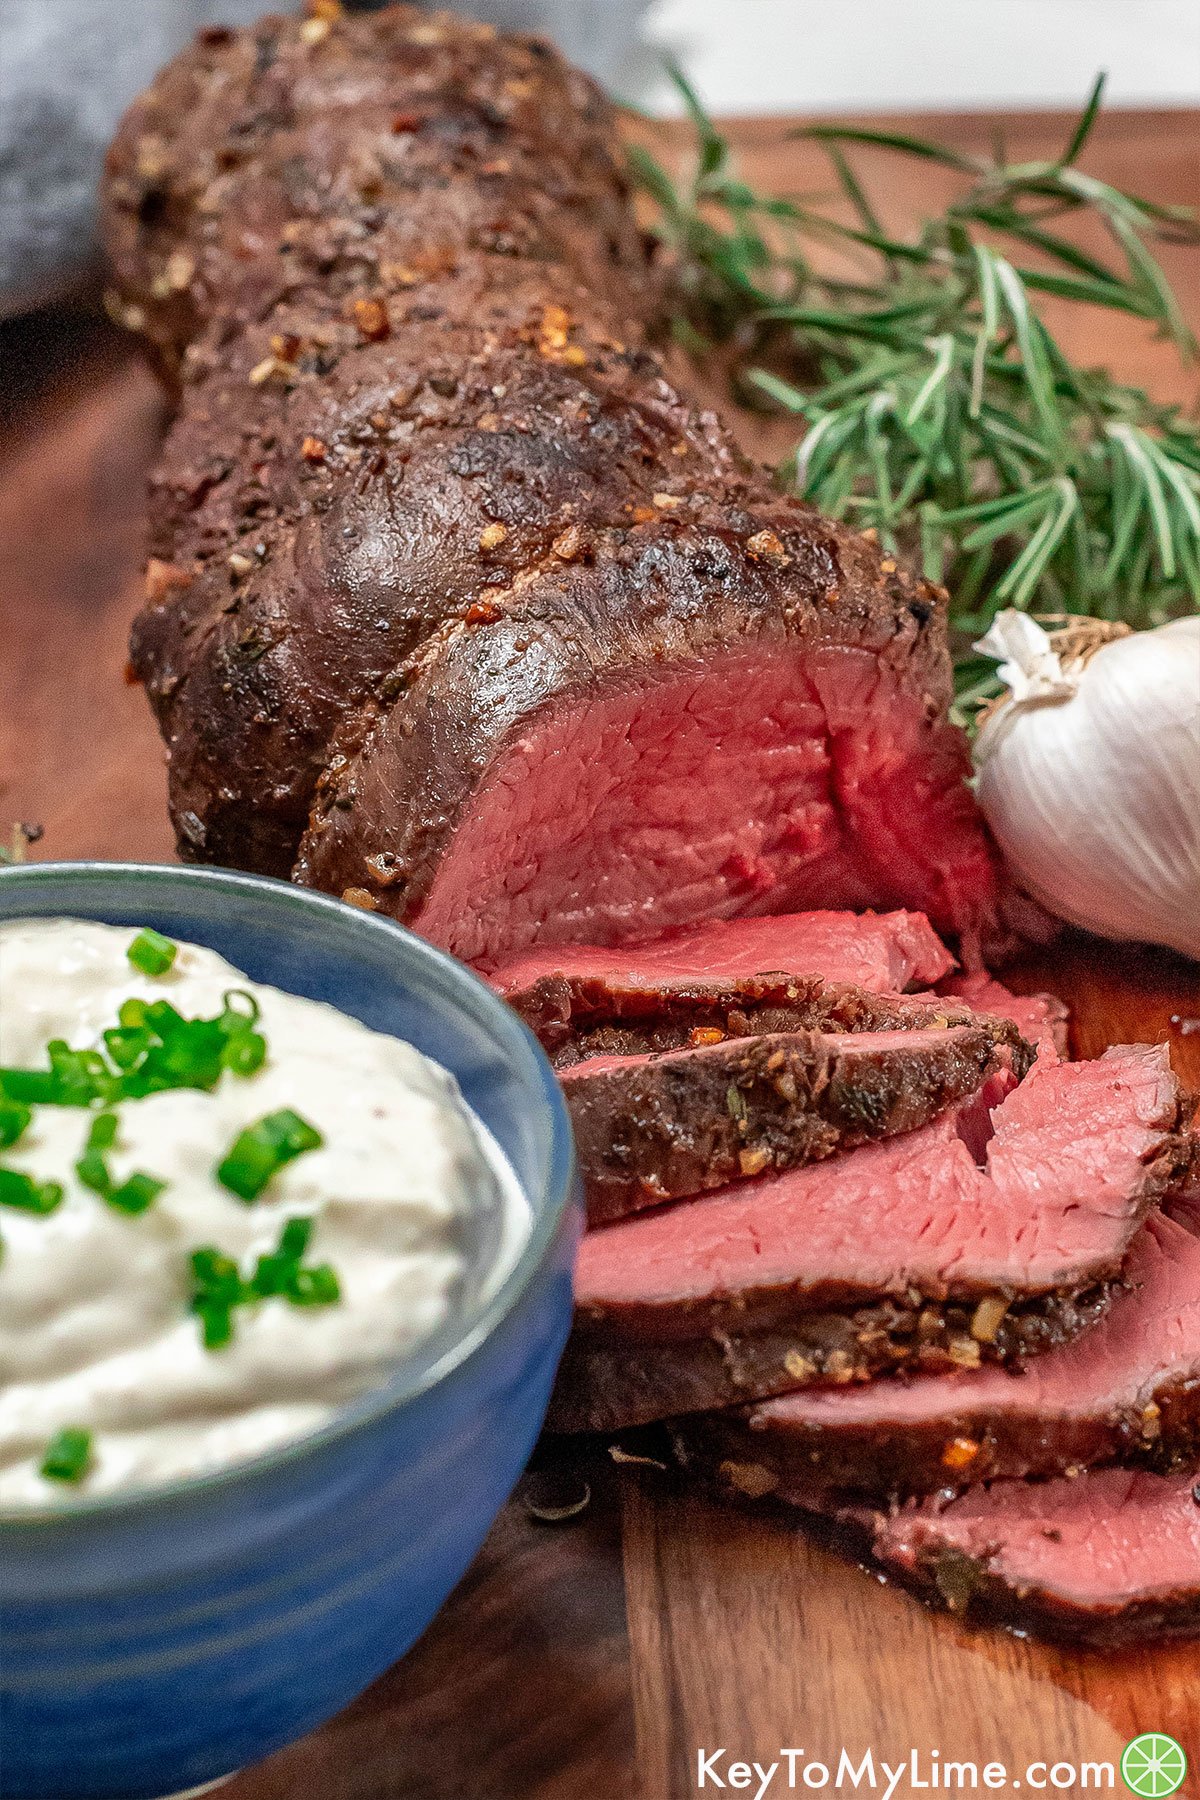 A partially sliced beef tenderloin resting on a cutting board next to a small bowl of horseradish sauce.